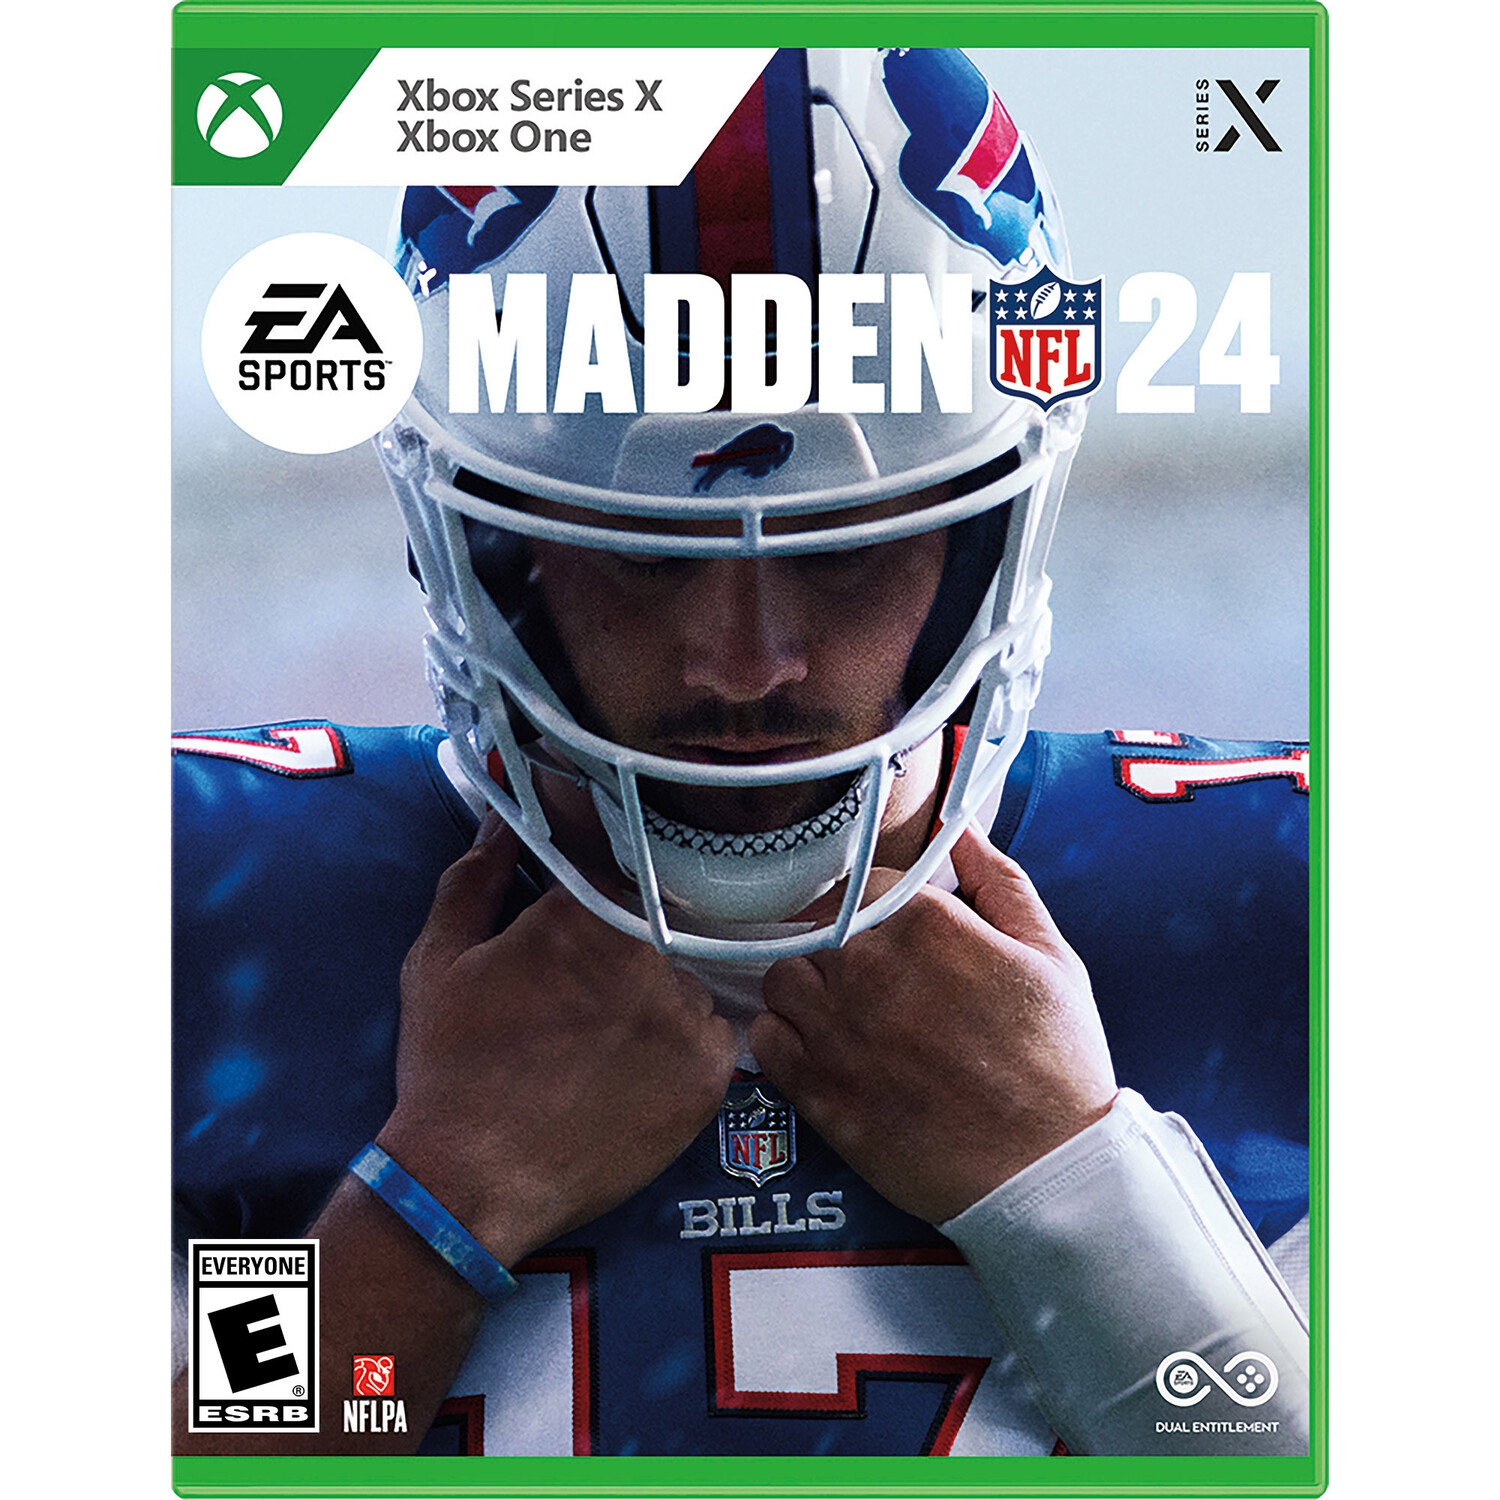 Madden NFL 24 for XBOX Series X and Xbox One [VIDEOGAMES]